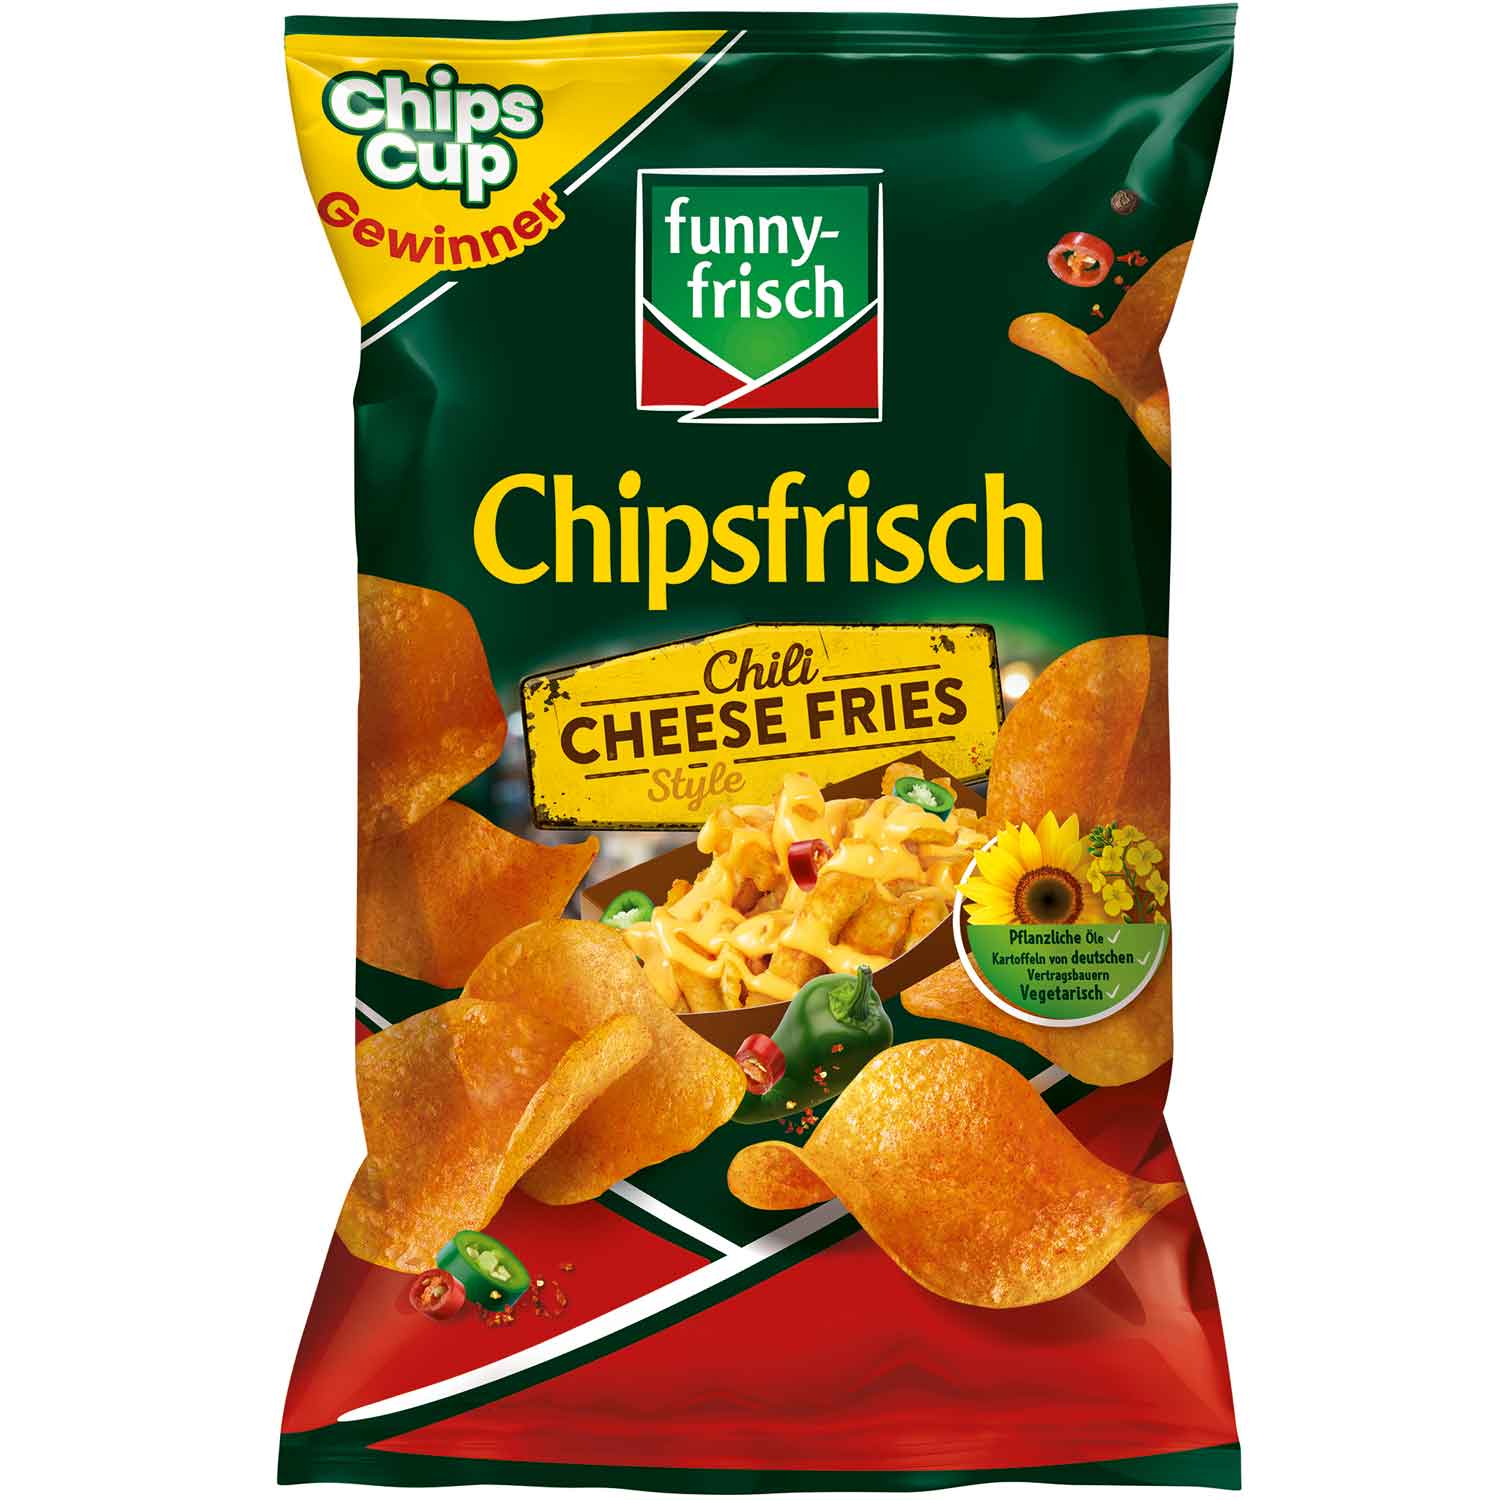 funny-frisch Chipsfrisch Chili Cheese Fries Style 150g - Candyshop.ch